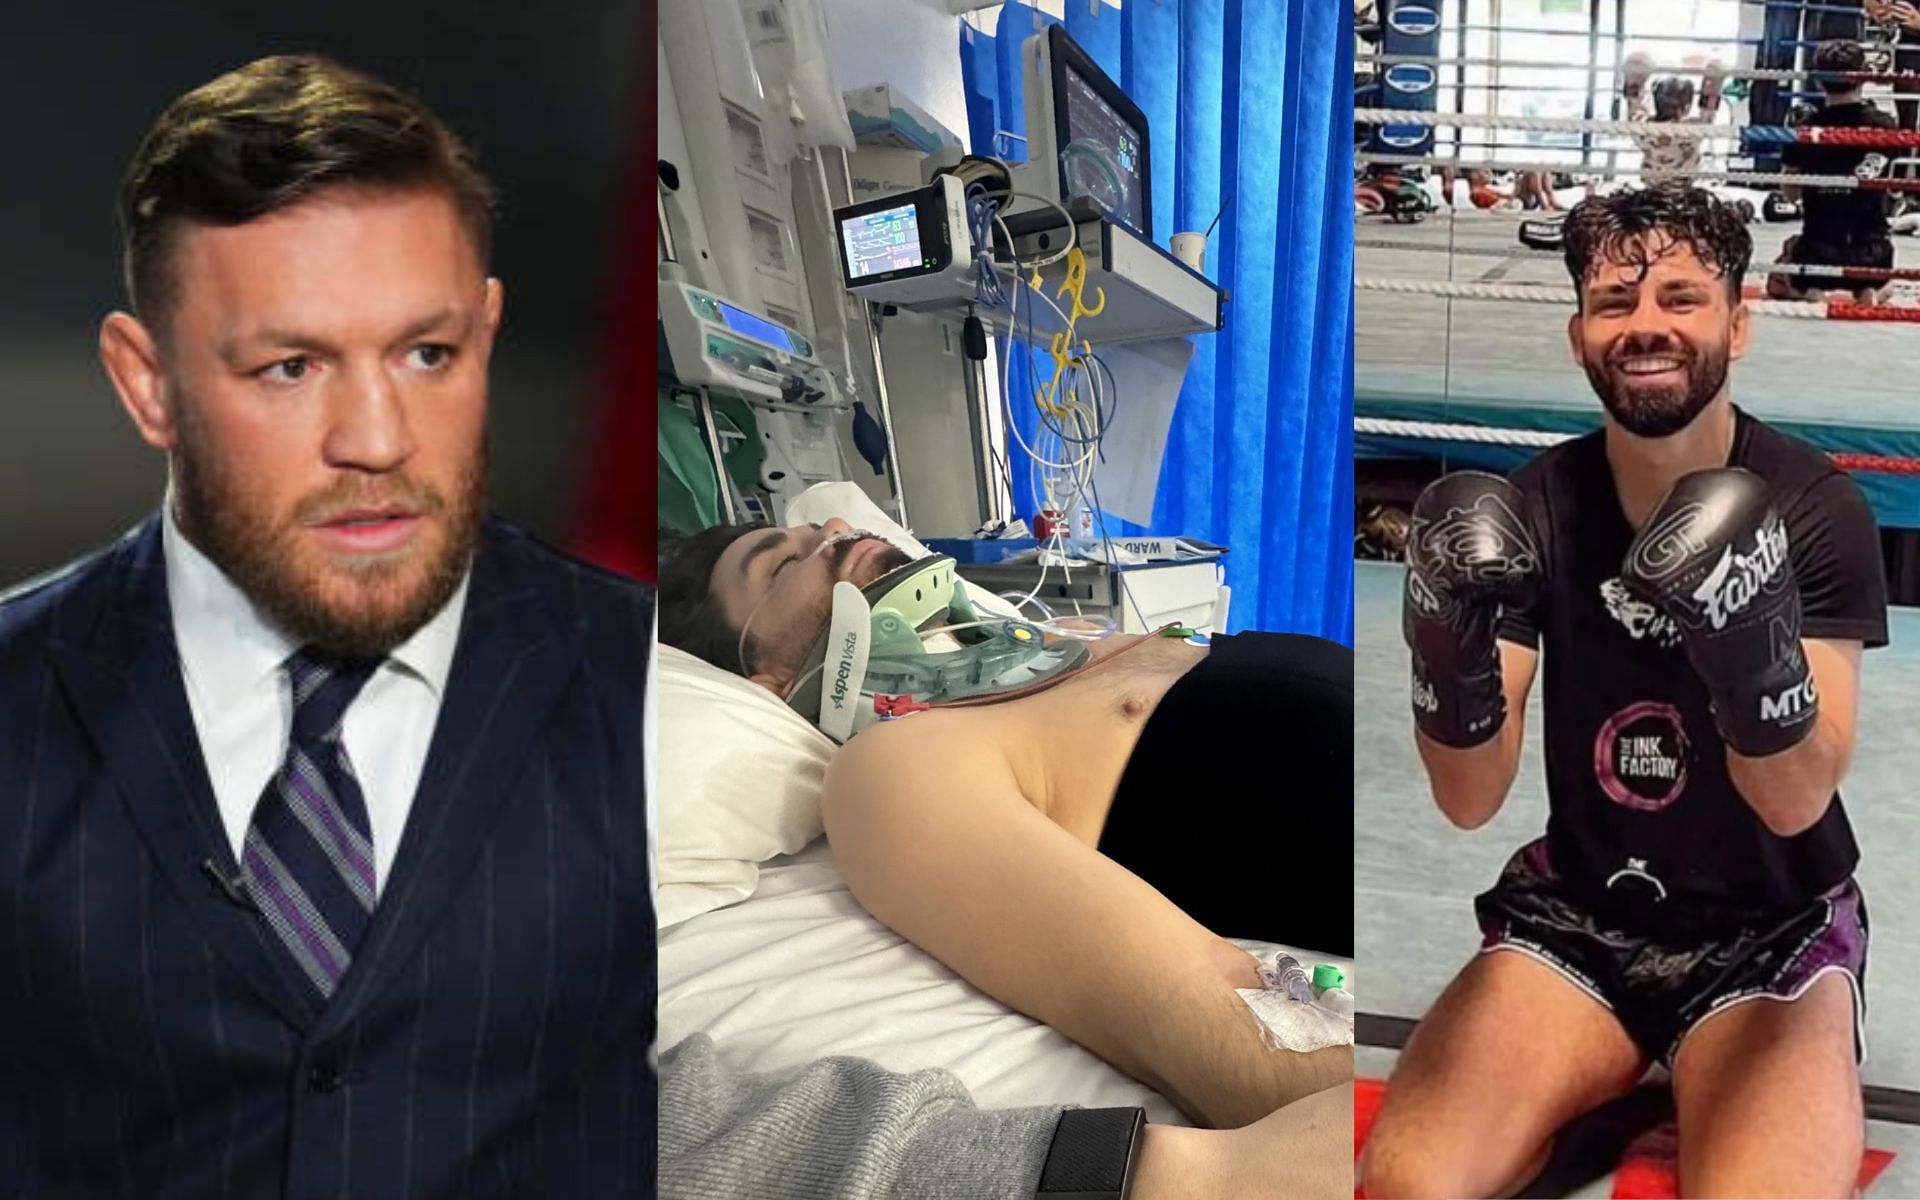 Conor McGregor (left) shares touching message with Ryan Curtis (middle) and (left) after terrible injury in training [Images Courtesy: @GettyImages and @leahmccourtmma on X]